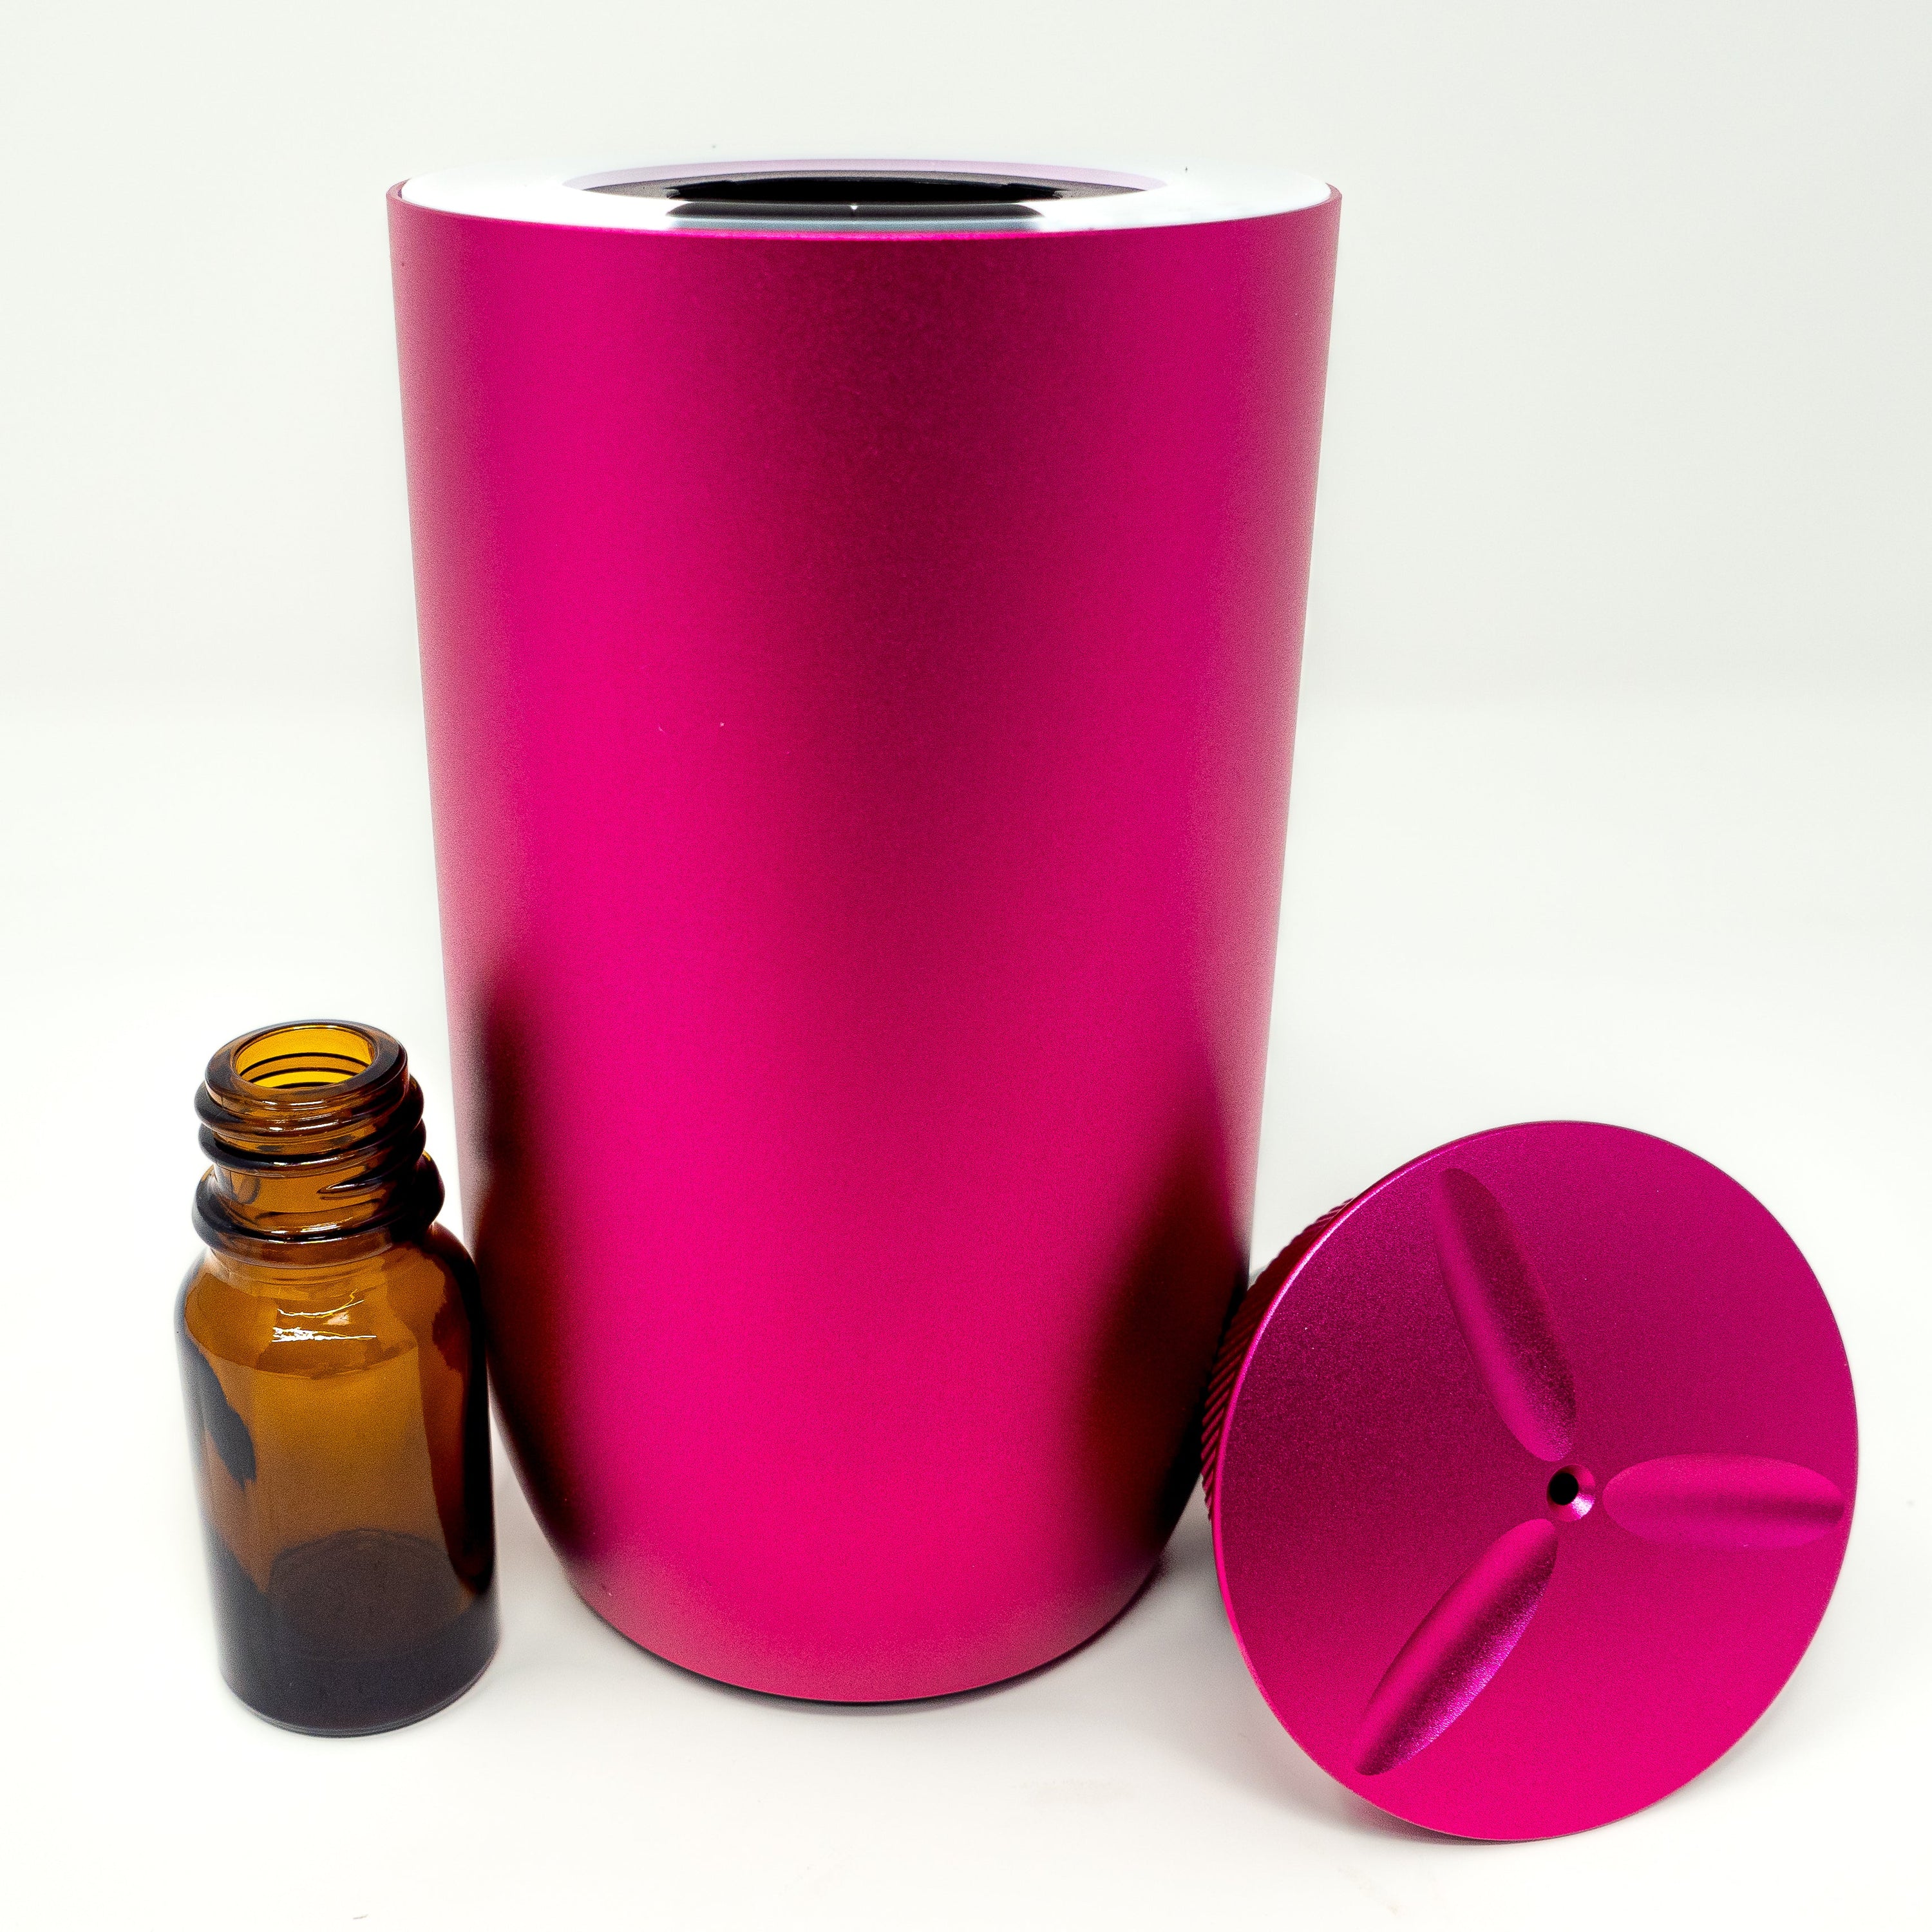 Portable Rechargeable Waterless Cold-Air Scent Diffuser - 10ml Capacity Color: Pink Disassembled